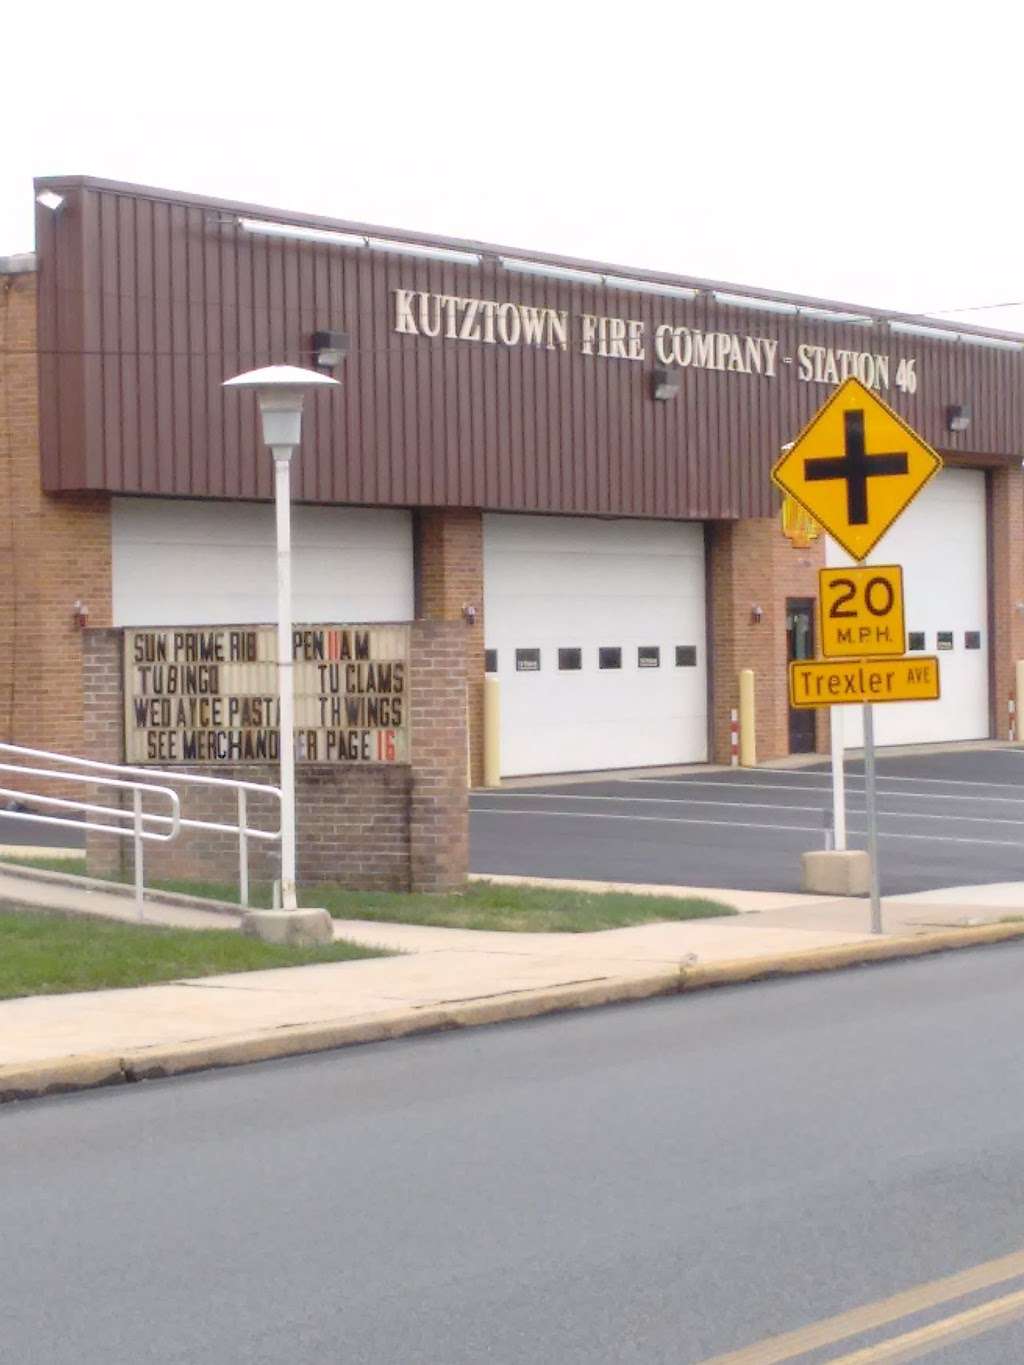 Kutztown Fire Company Banquet Hall & Social Quarters | 310 Noble St, Kutztown, PA 19530 | Phone: (610) 683-8703 ext. 3